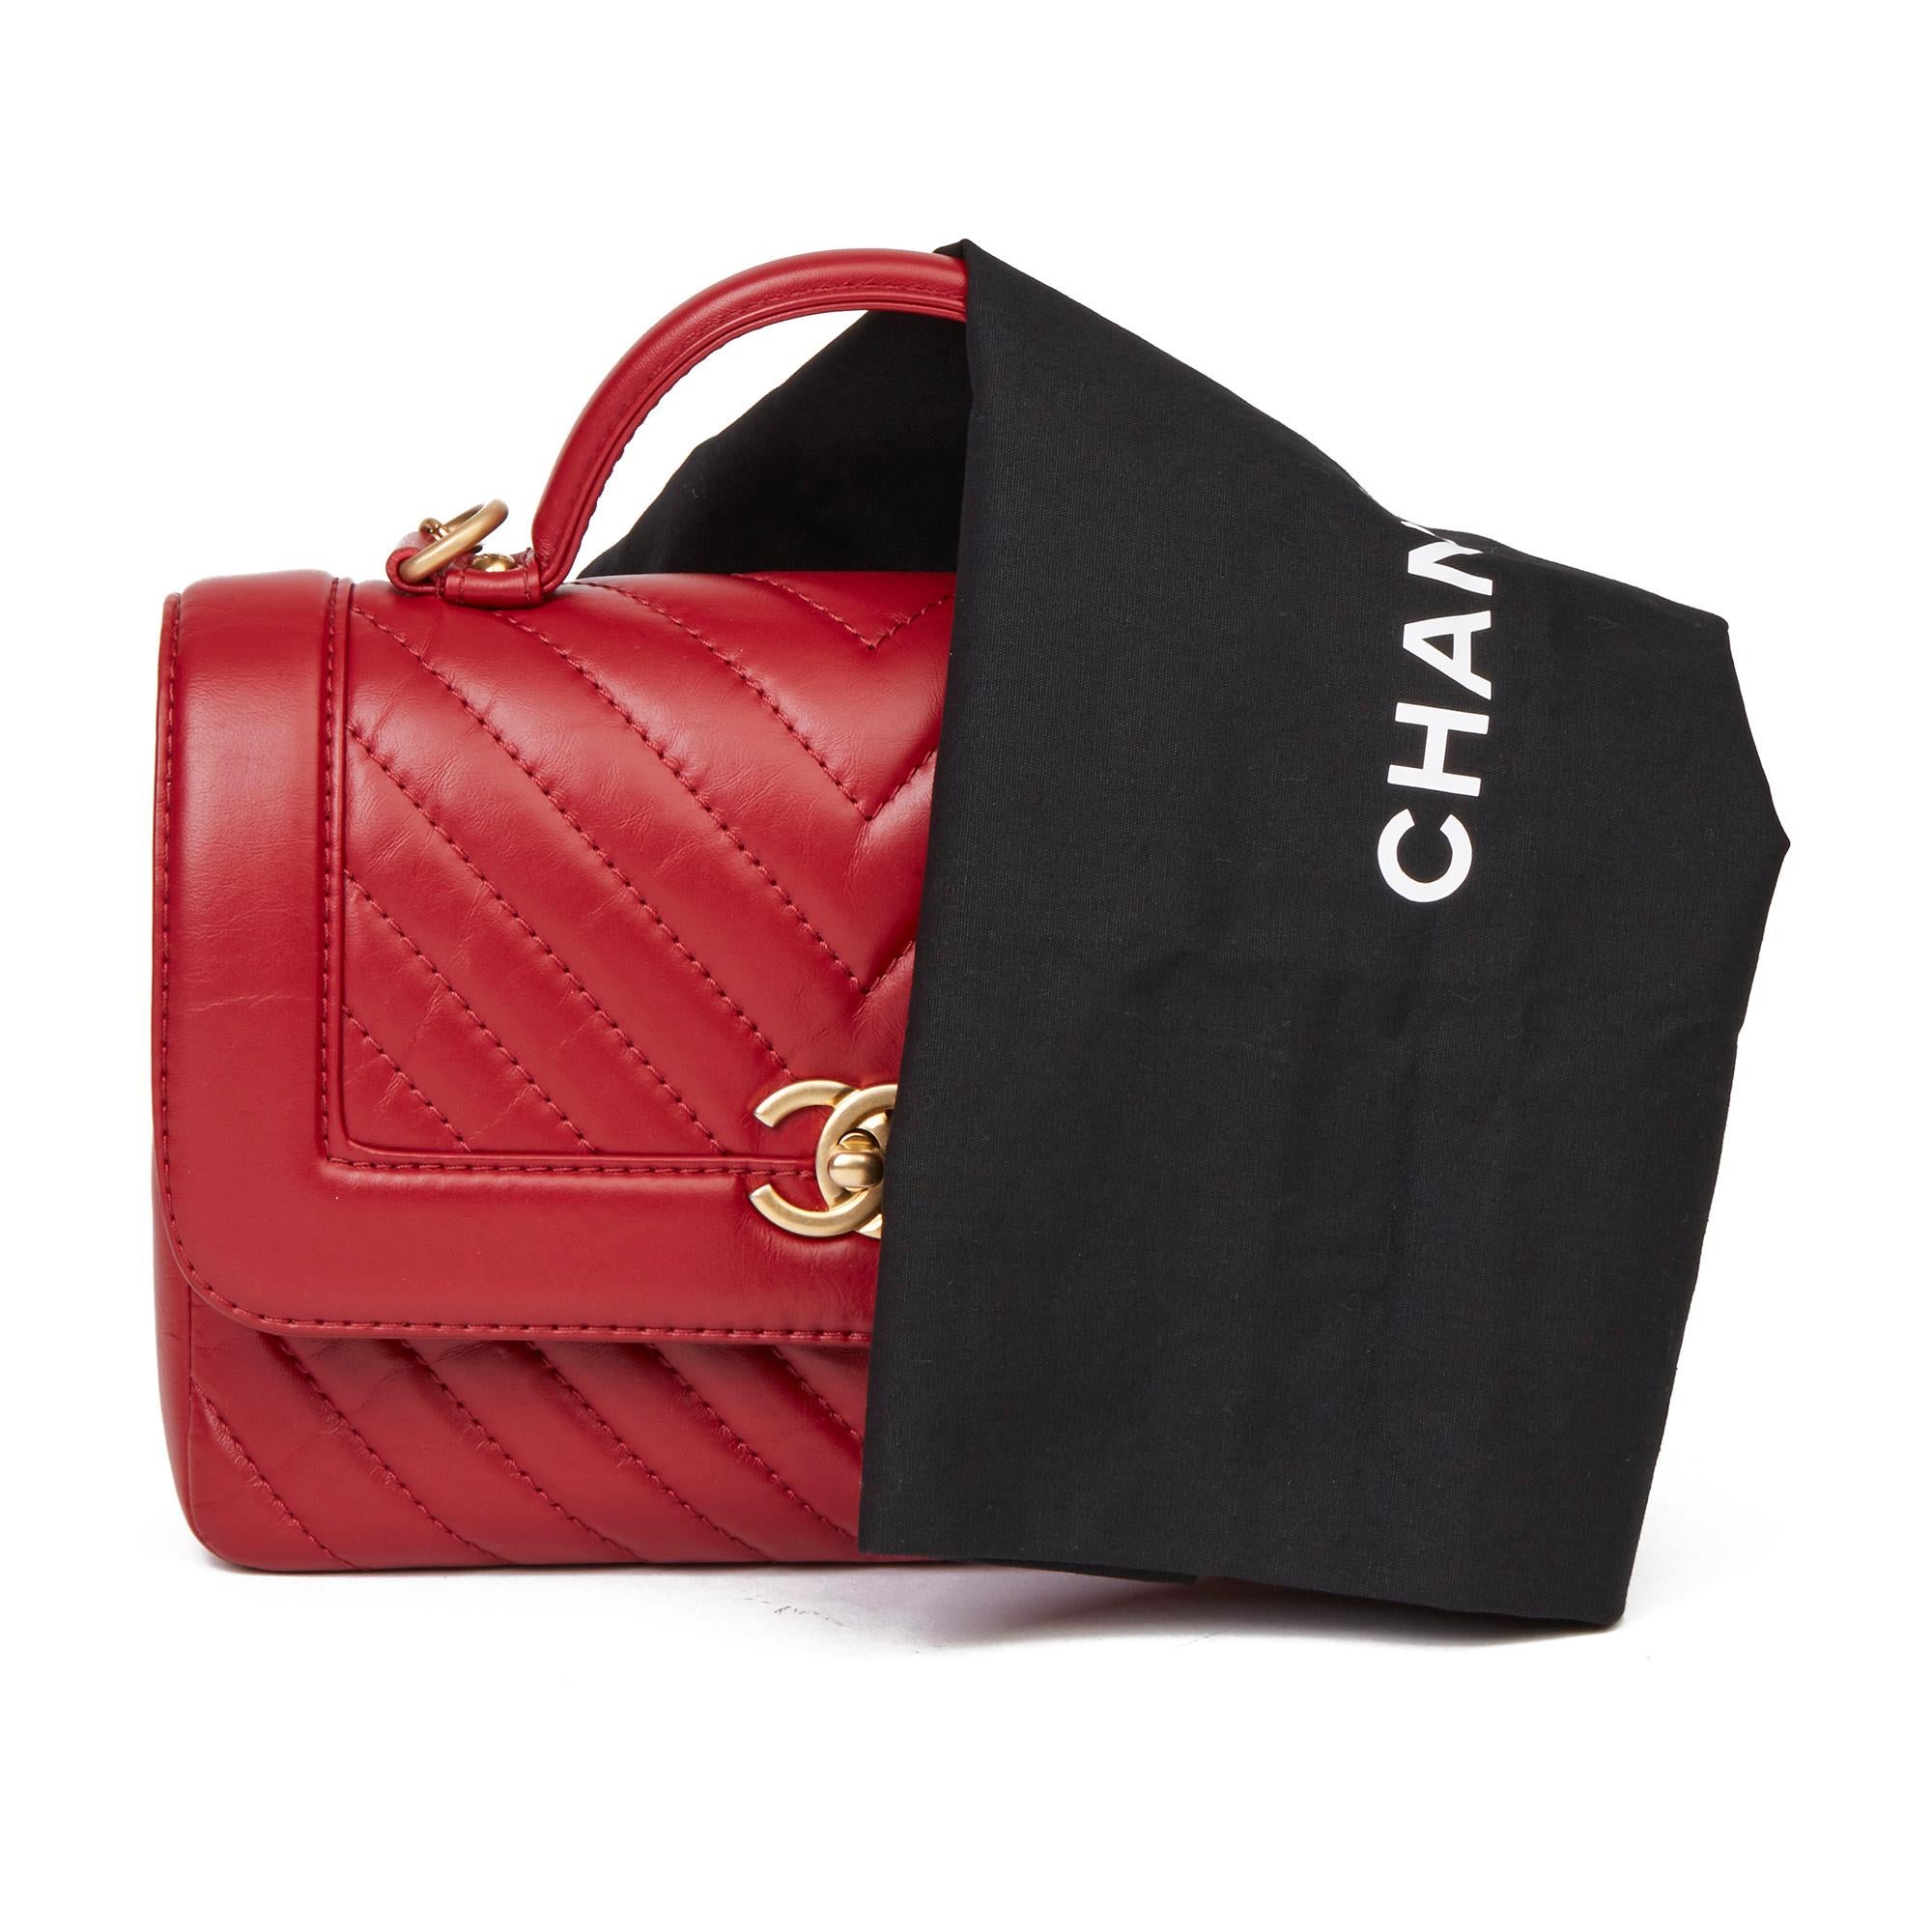 CHANEL 
Red Chevron Quilted Calfskin Leather Classic Top Handle Flap Bag

Xupes Reference: HB3654
Serial Number: 24517457
Age (Circa): 2018
Accompanied By: Chanel Dust Bag
Authenticity Details: Serial Sticker (Made in France) 
Gender: Ladies
Type: